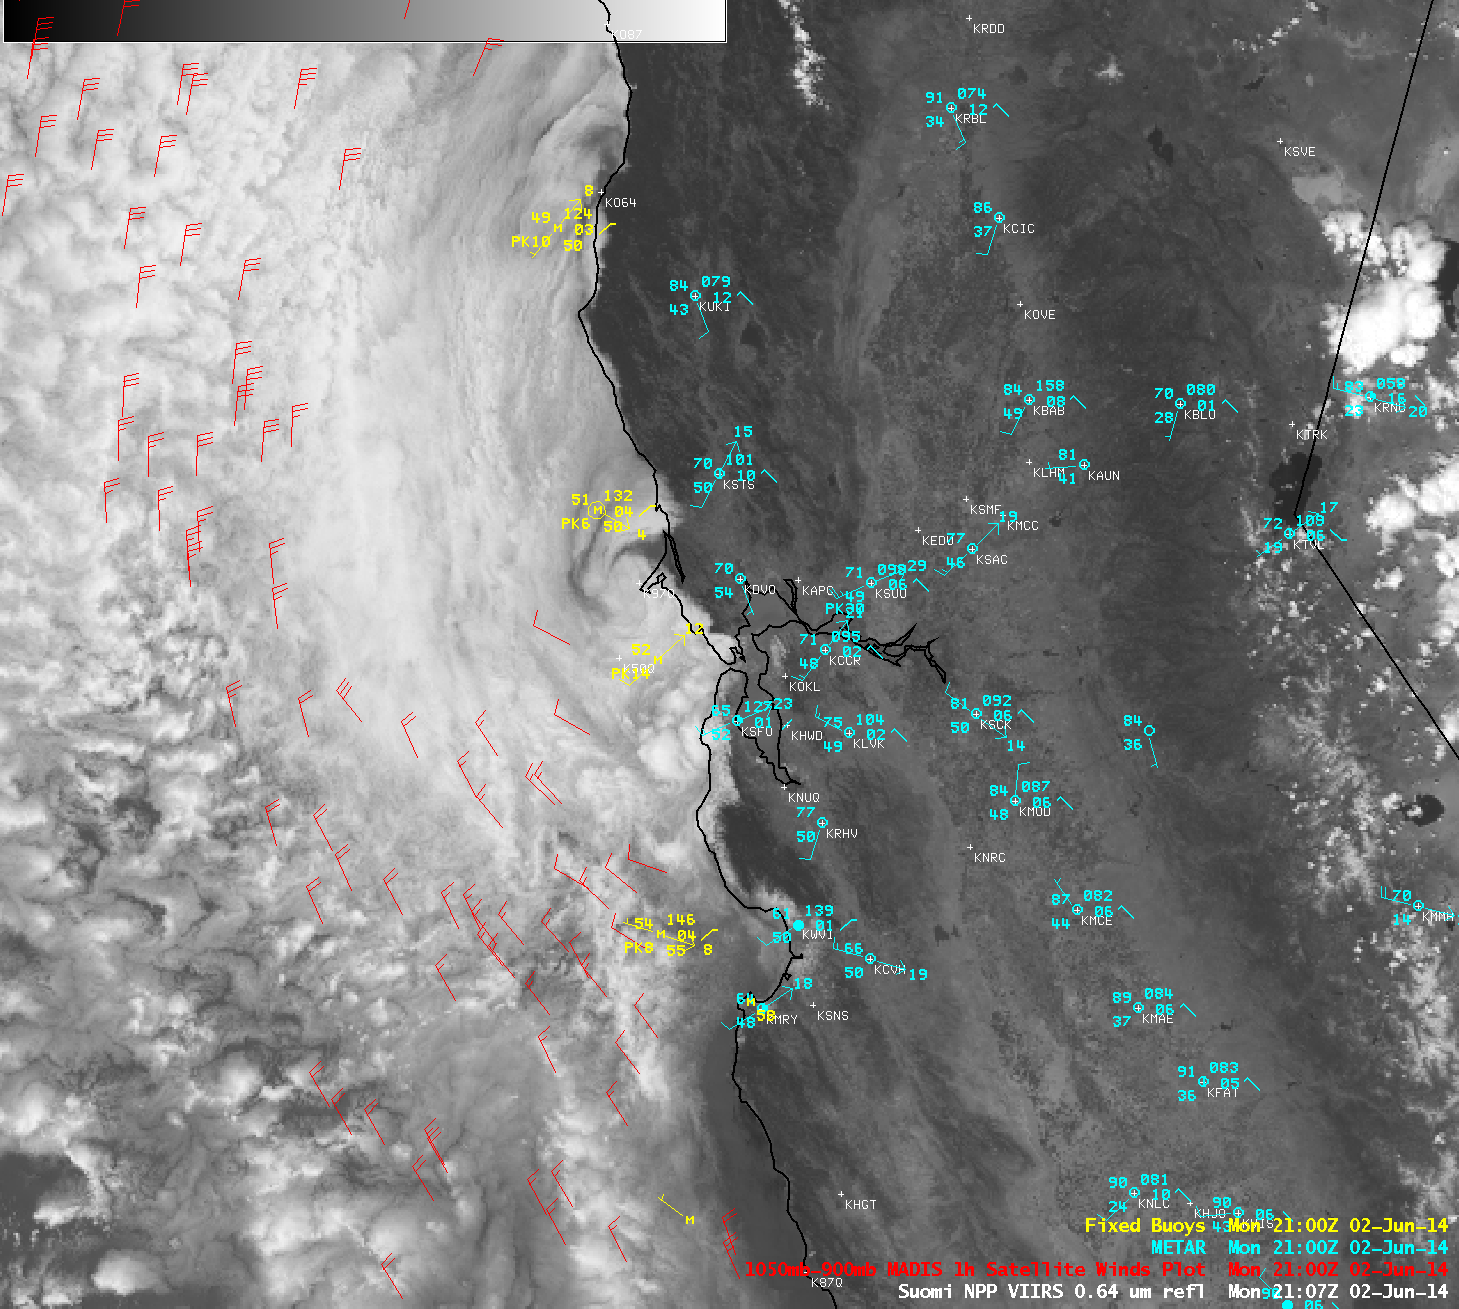 Suomi NPP VIIRS 0.64 µm visible channel image, with surface and buoy observations and 1-hour MADIS satellite winds